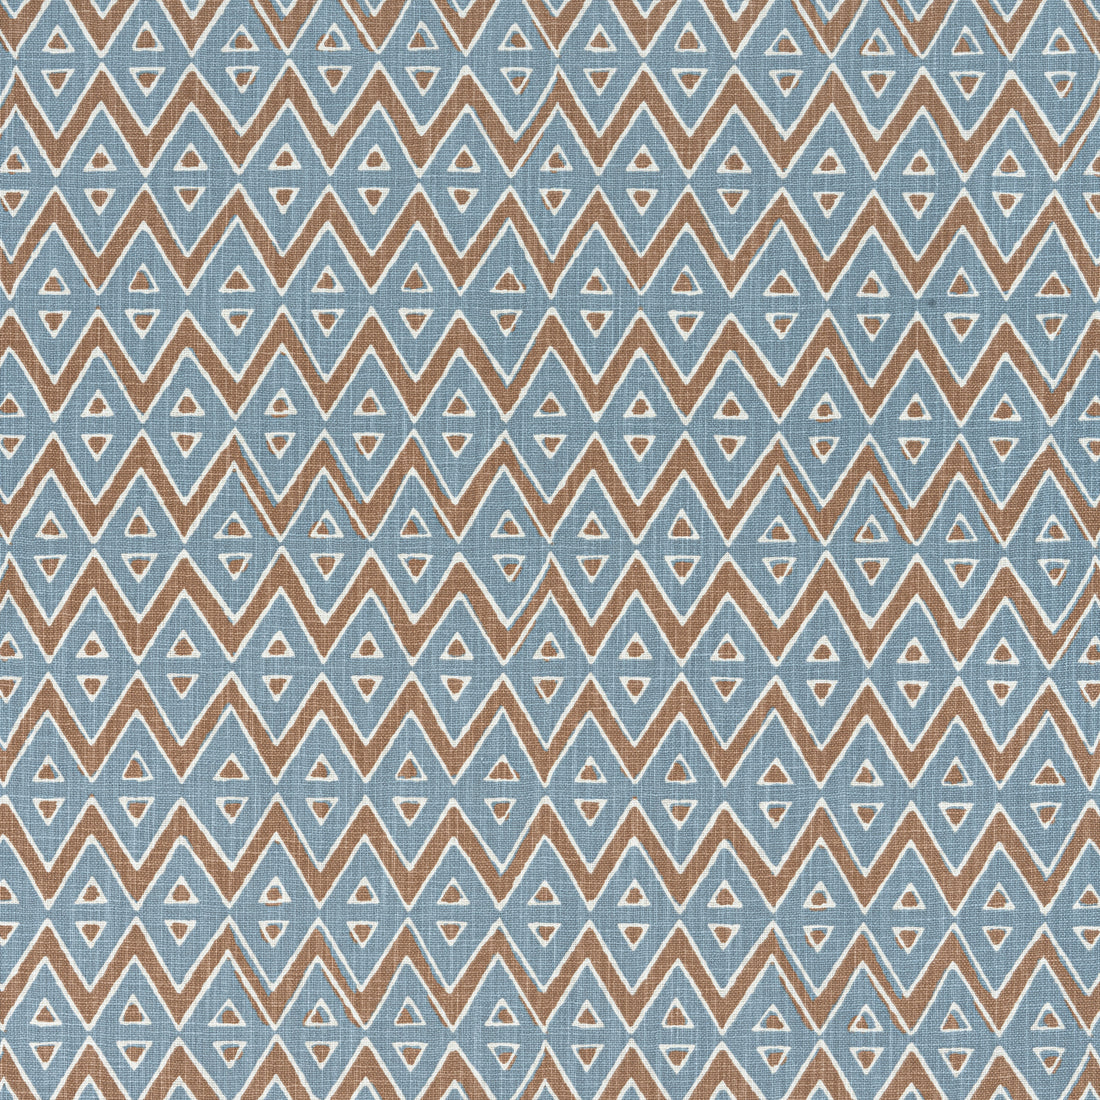 Tiburon fabric in spa blue color - pattern number F913234 - by Thibaut in the Mesa collection